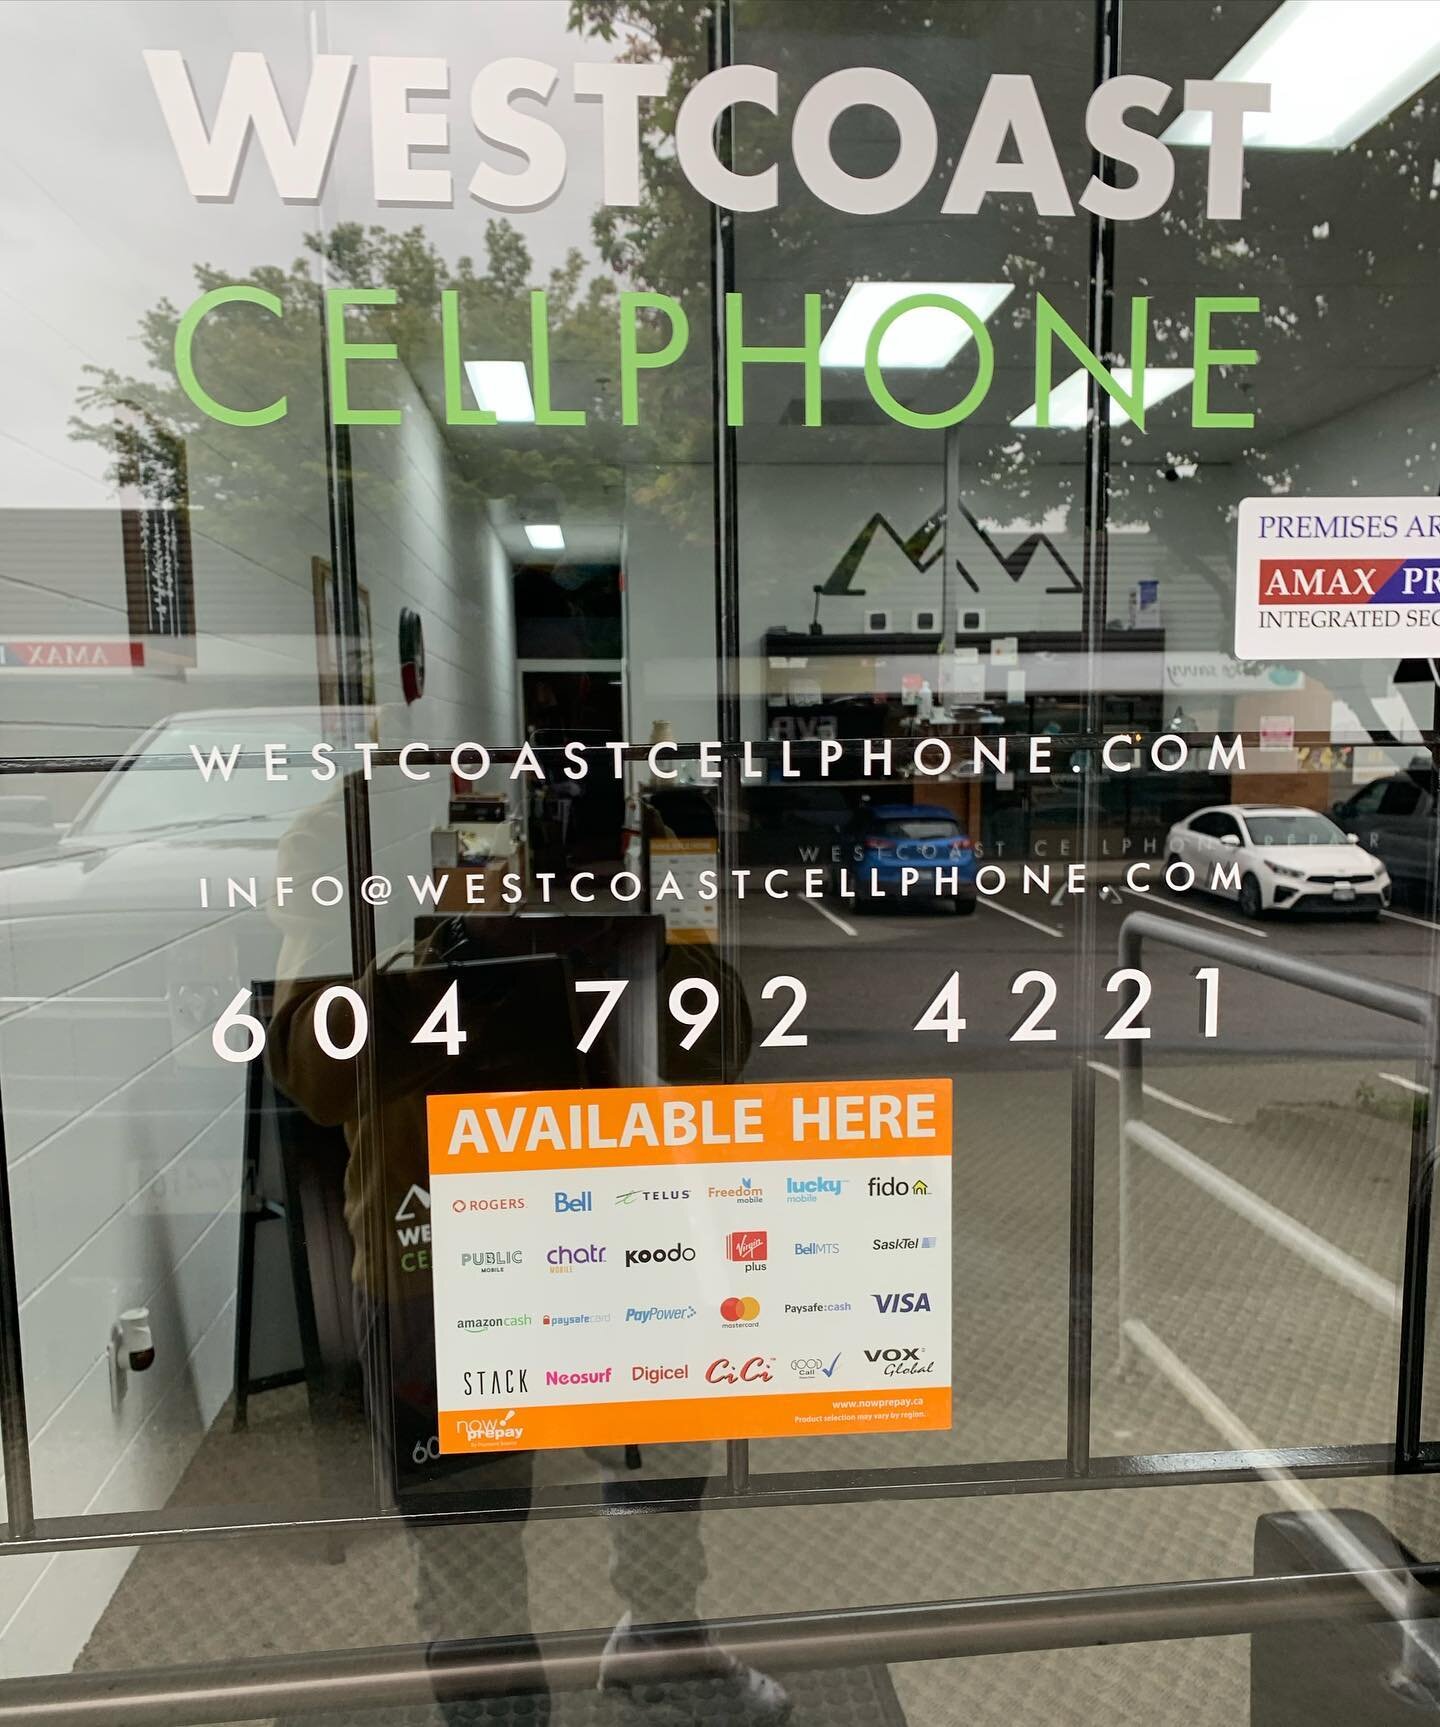 Now Available! Pre paid minutes! Stop by and refill your minute plan. West Coast Cellphone 📱 #westcoast #chilliwack #chilliwackbc #cellphonerepair #cellphone #fraservalley